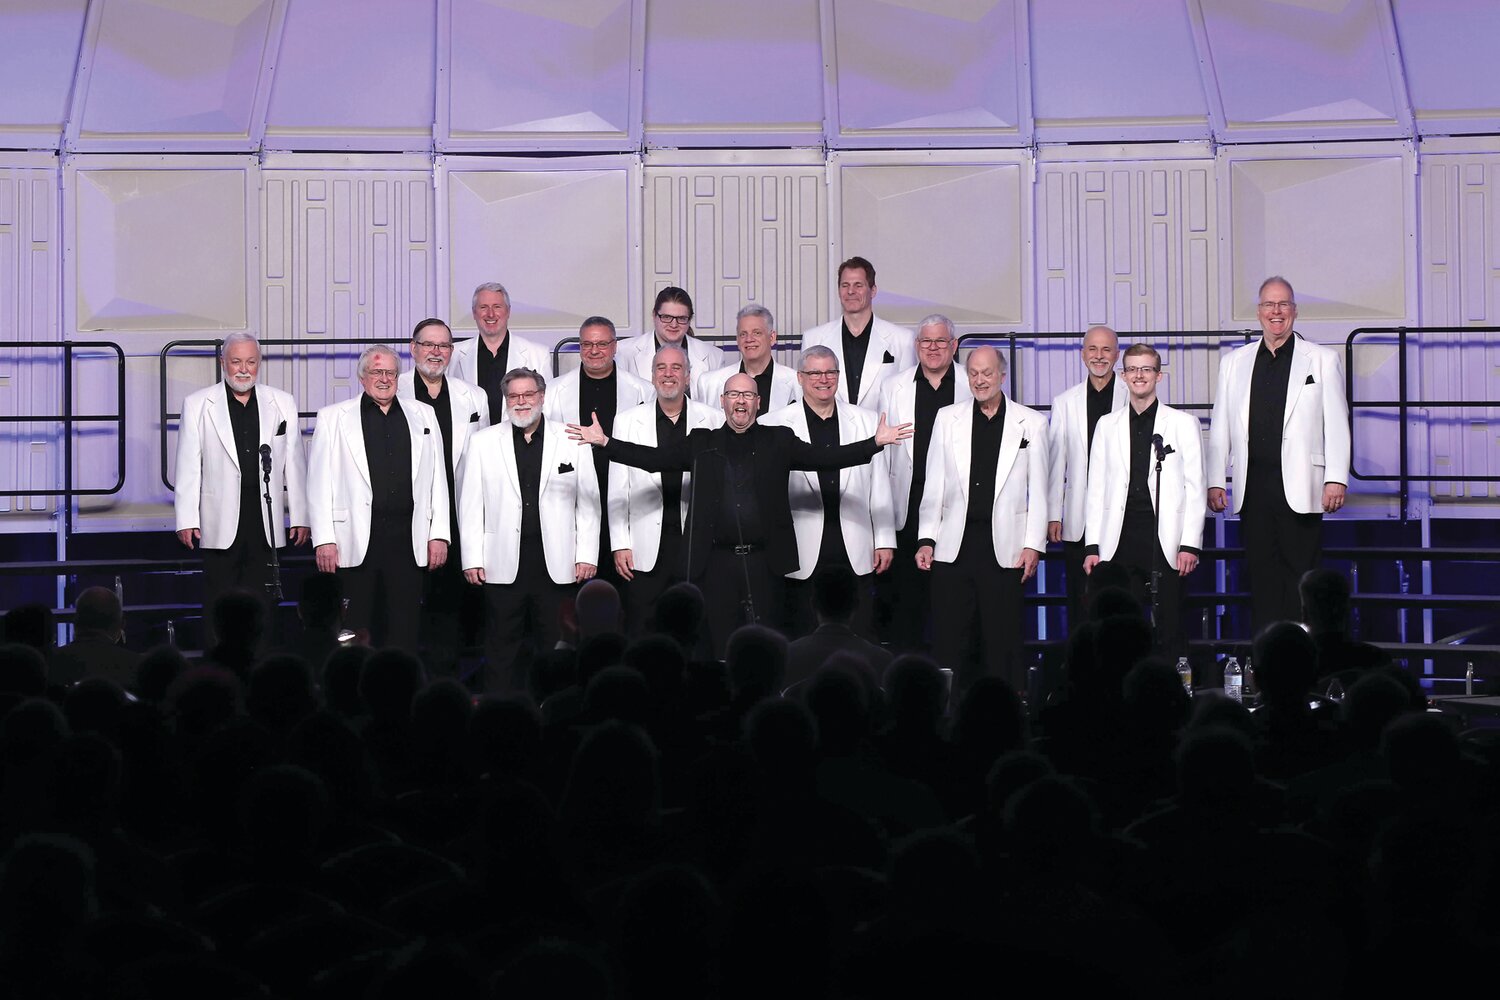 The Bucks County Country Gentlemen  a cappella chorus will present its 48th annual show in Doylestown on Nov. 11.